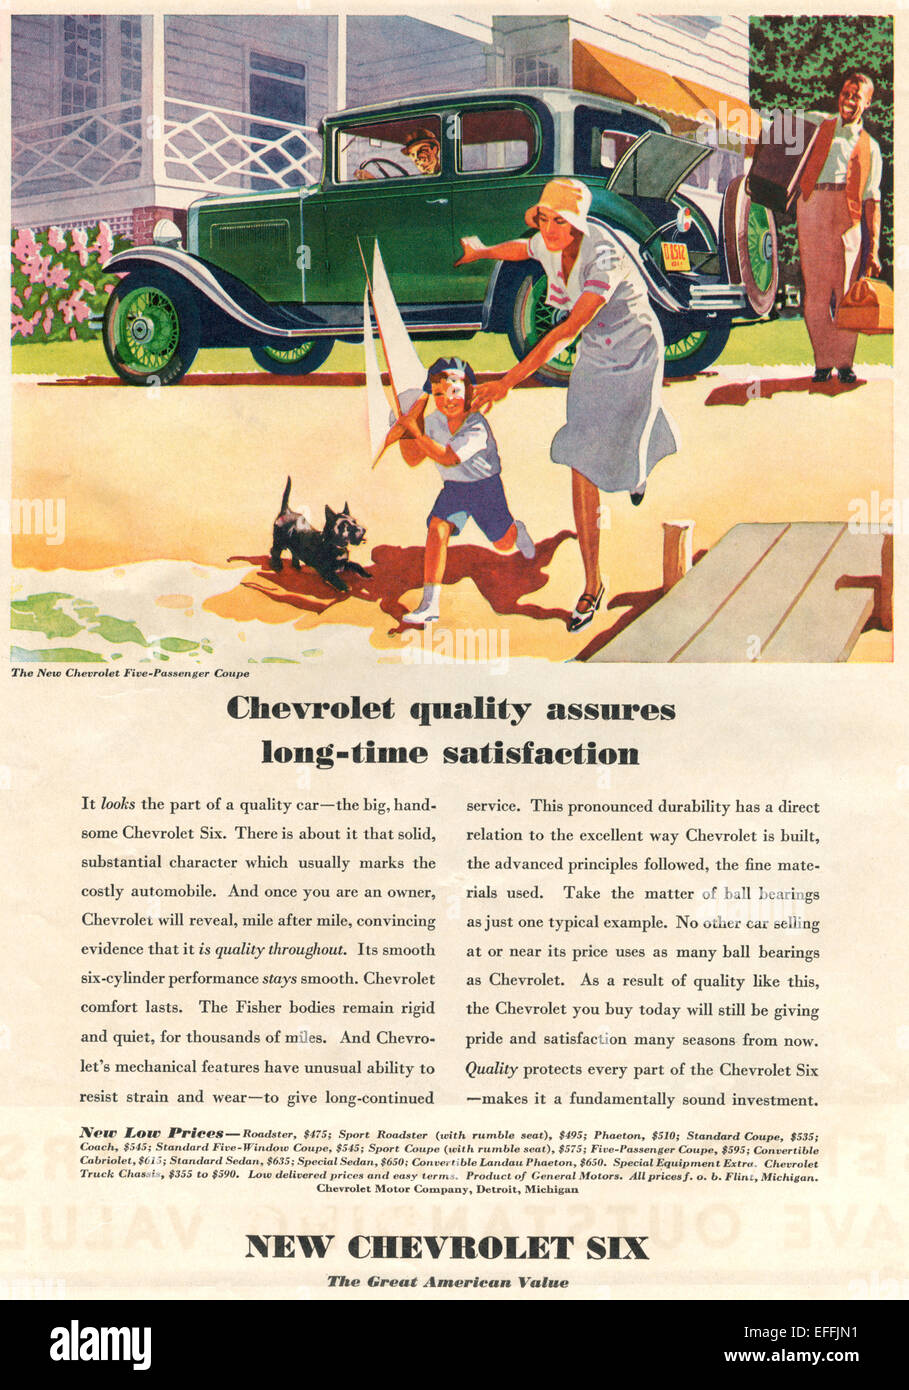 1930's American advertisement for the New Chevrolet Six Passenger Coupe. Stock Photo